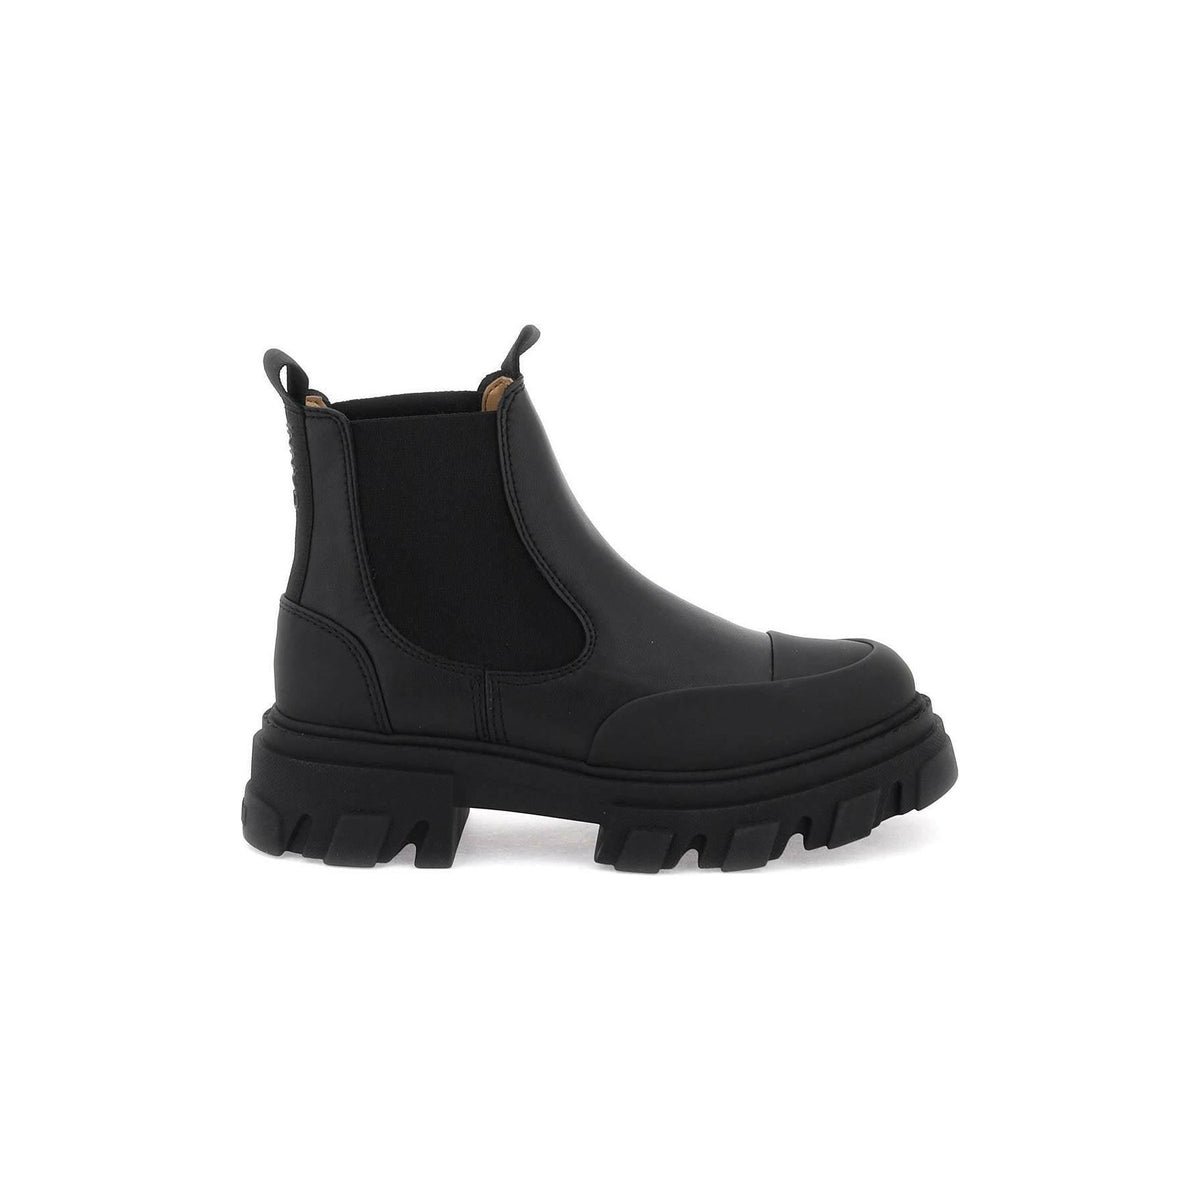 GANNI - Black Stitch Cleated Low Chelsea Ankle Boots - JOHN JULIA